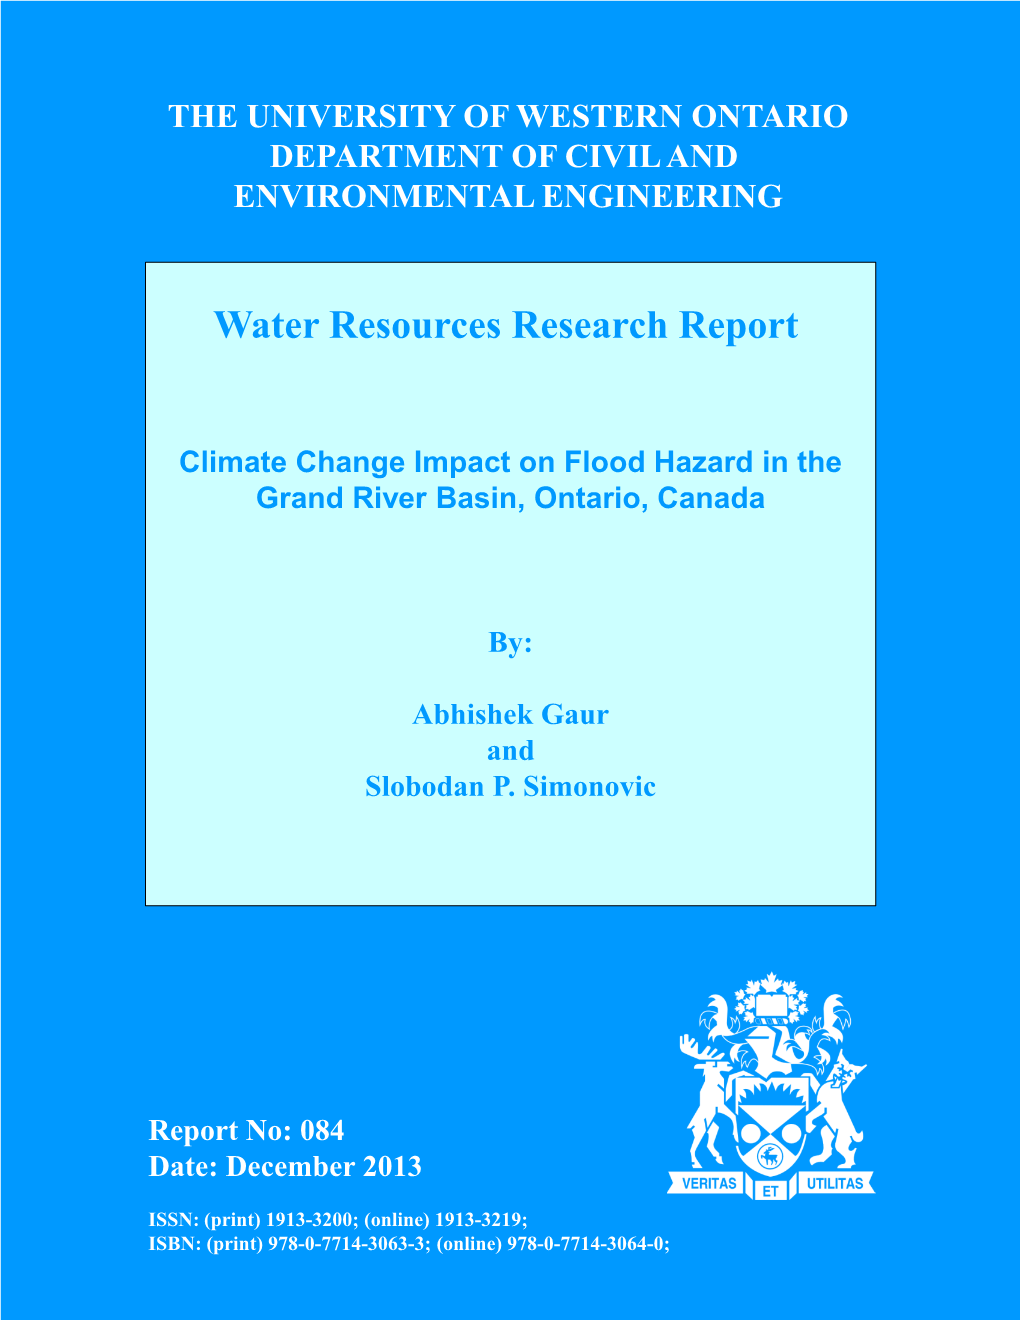 Climate Change Impact on Flood Hazard in the Grand River Basin, Ontario, Canada